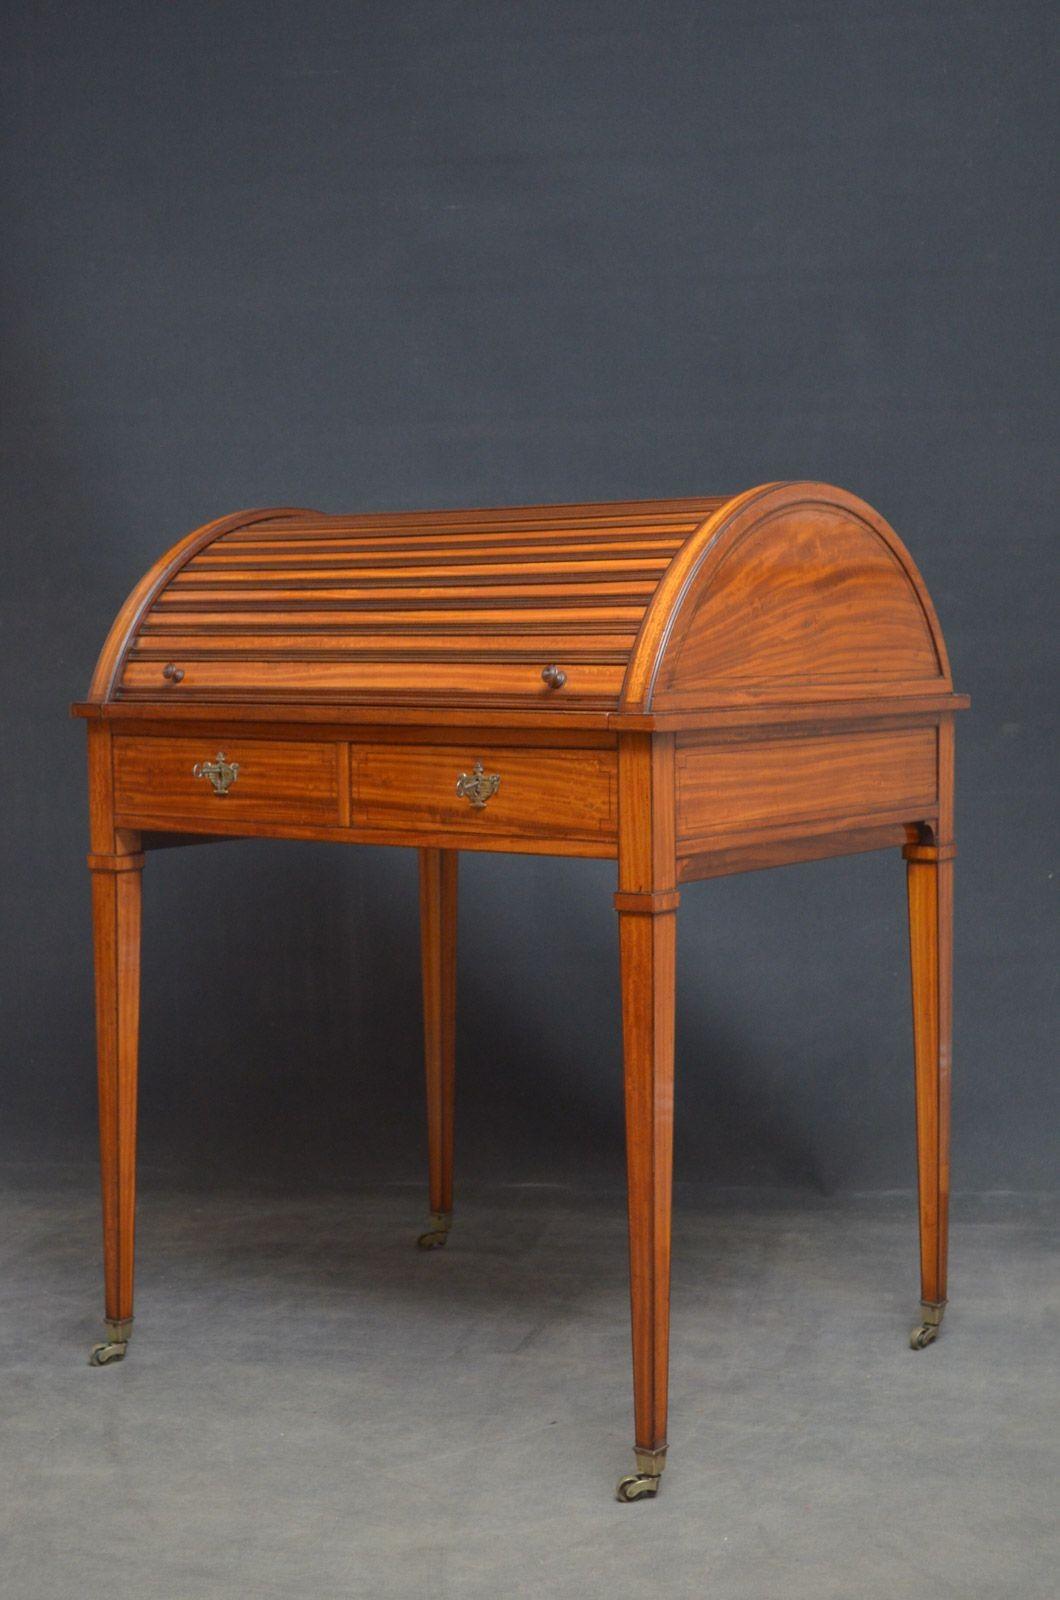 Sn4637 Fine late Victorian satinwood bureau, having arched tambour top which open to reveal pigeons holes, small inlaid drawers and slide out, green leather writing surface, all above 2 mahogany lined drawers (keys for decoration only), standing on